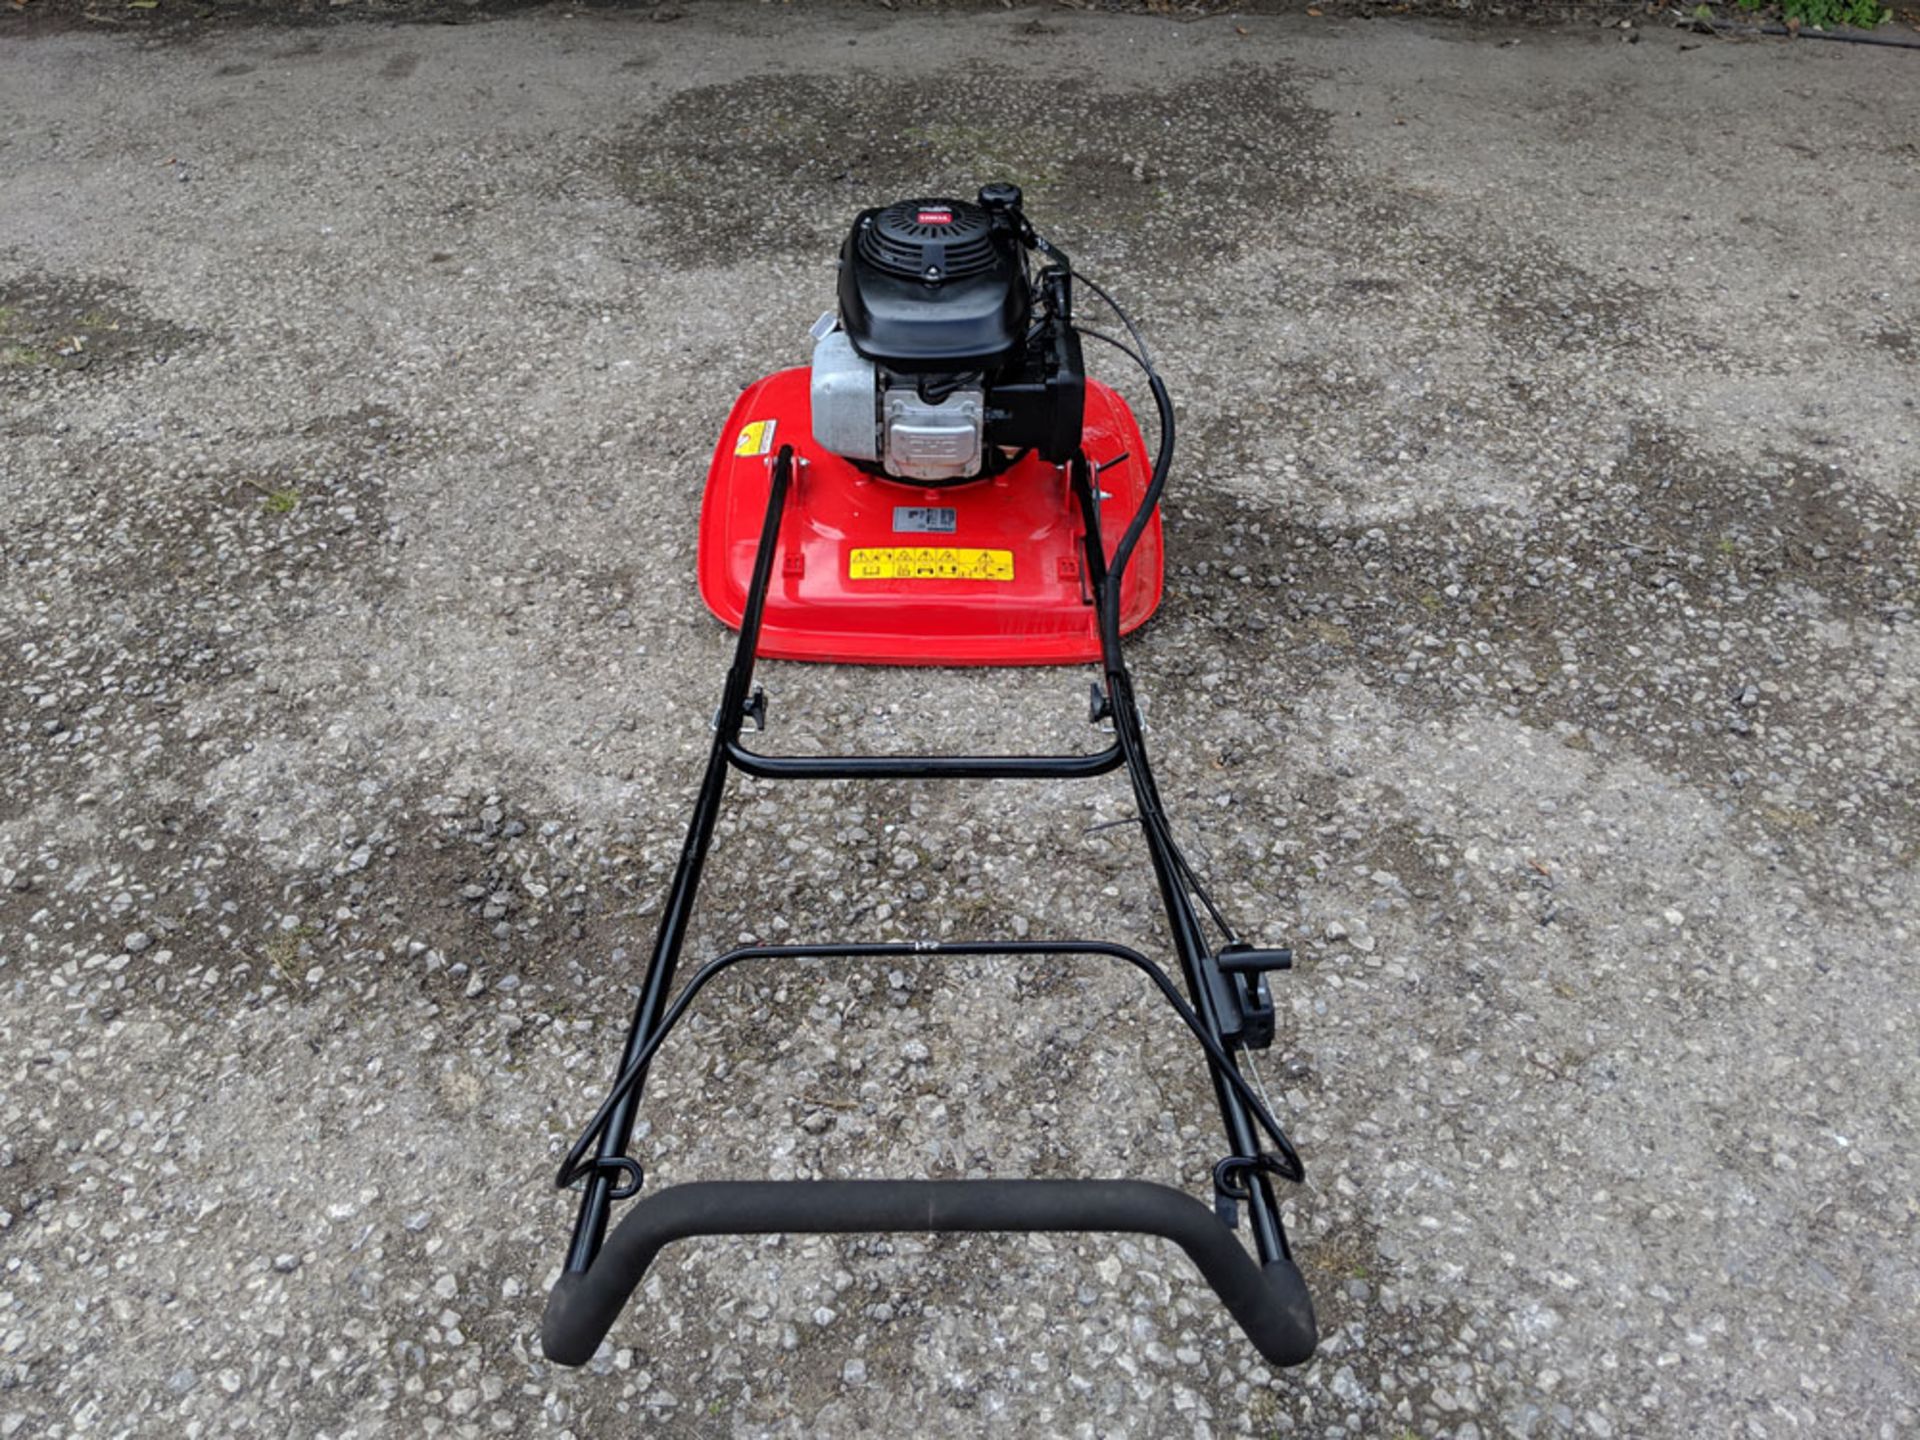 2011 Toro Hover Pro 500 Petrol Hover Mower - Image 2 of 5